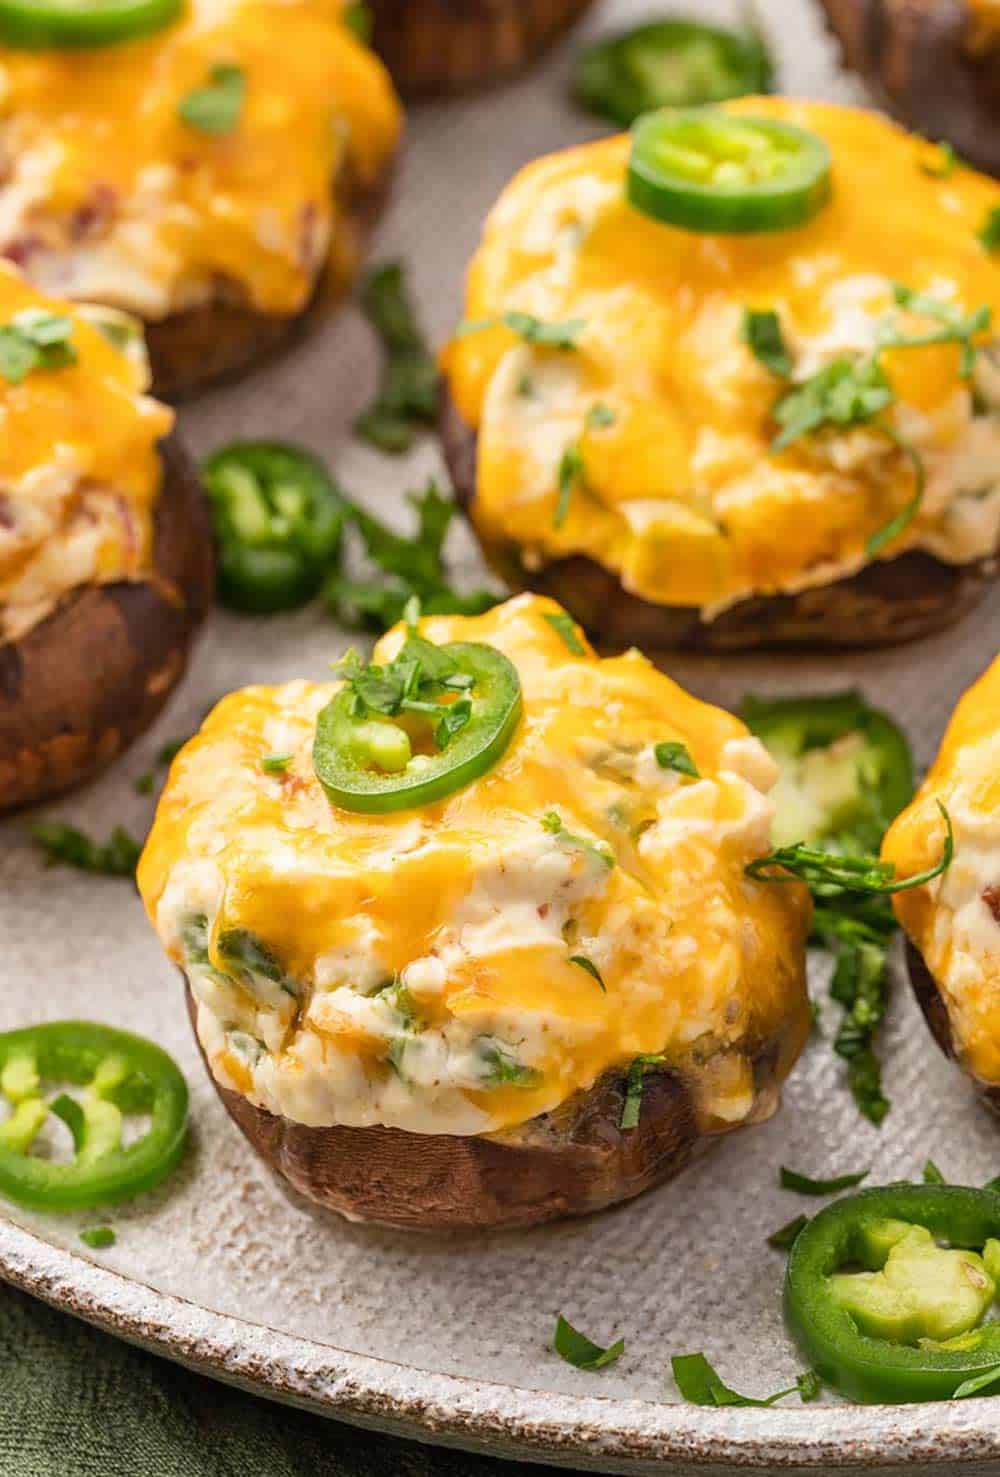 Plate of Jalapeno Popper Stuffed Mushrooms with a creamy cheese filling and jalapeno garnish.